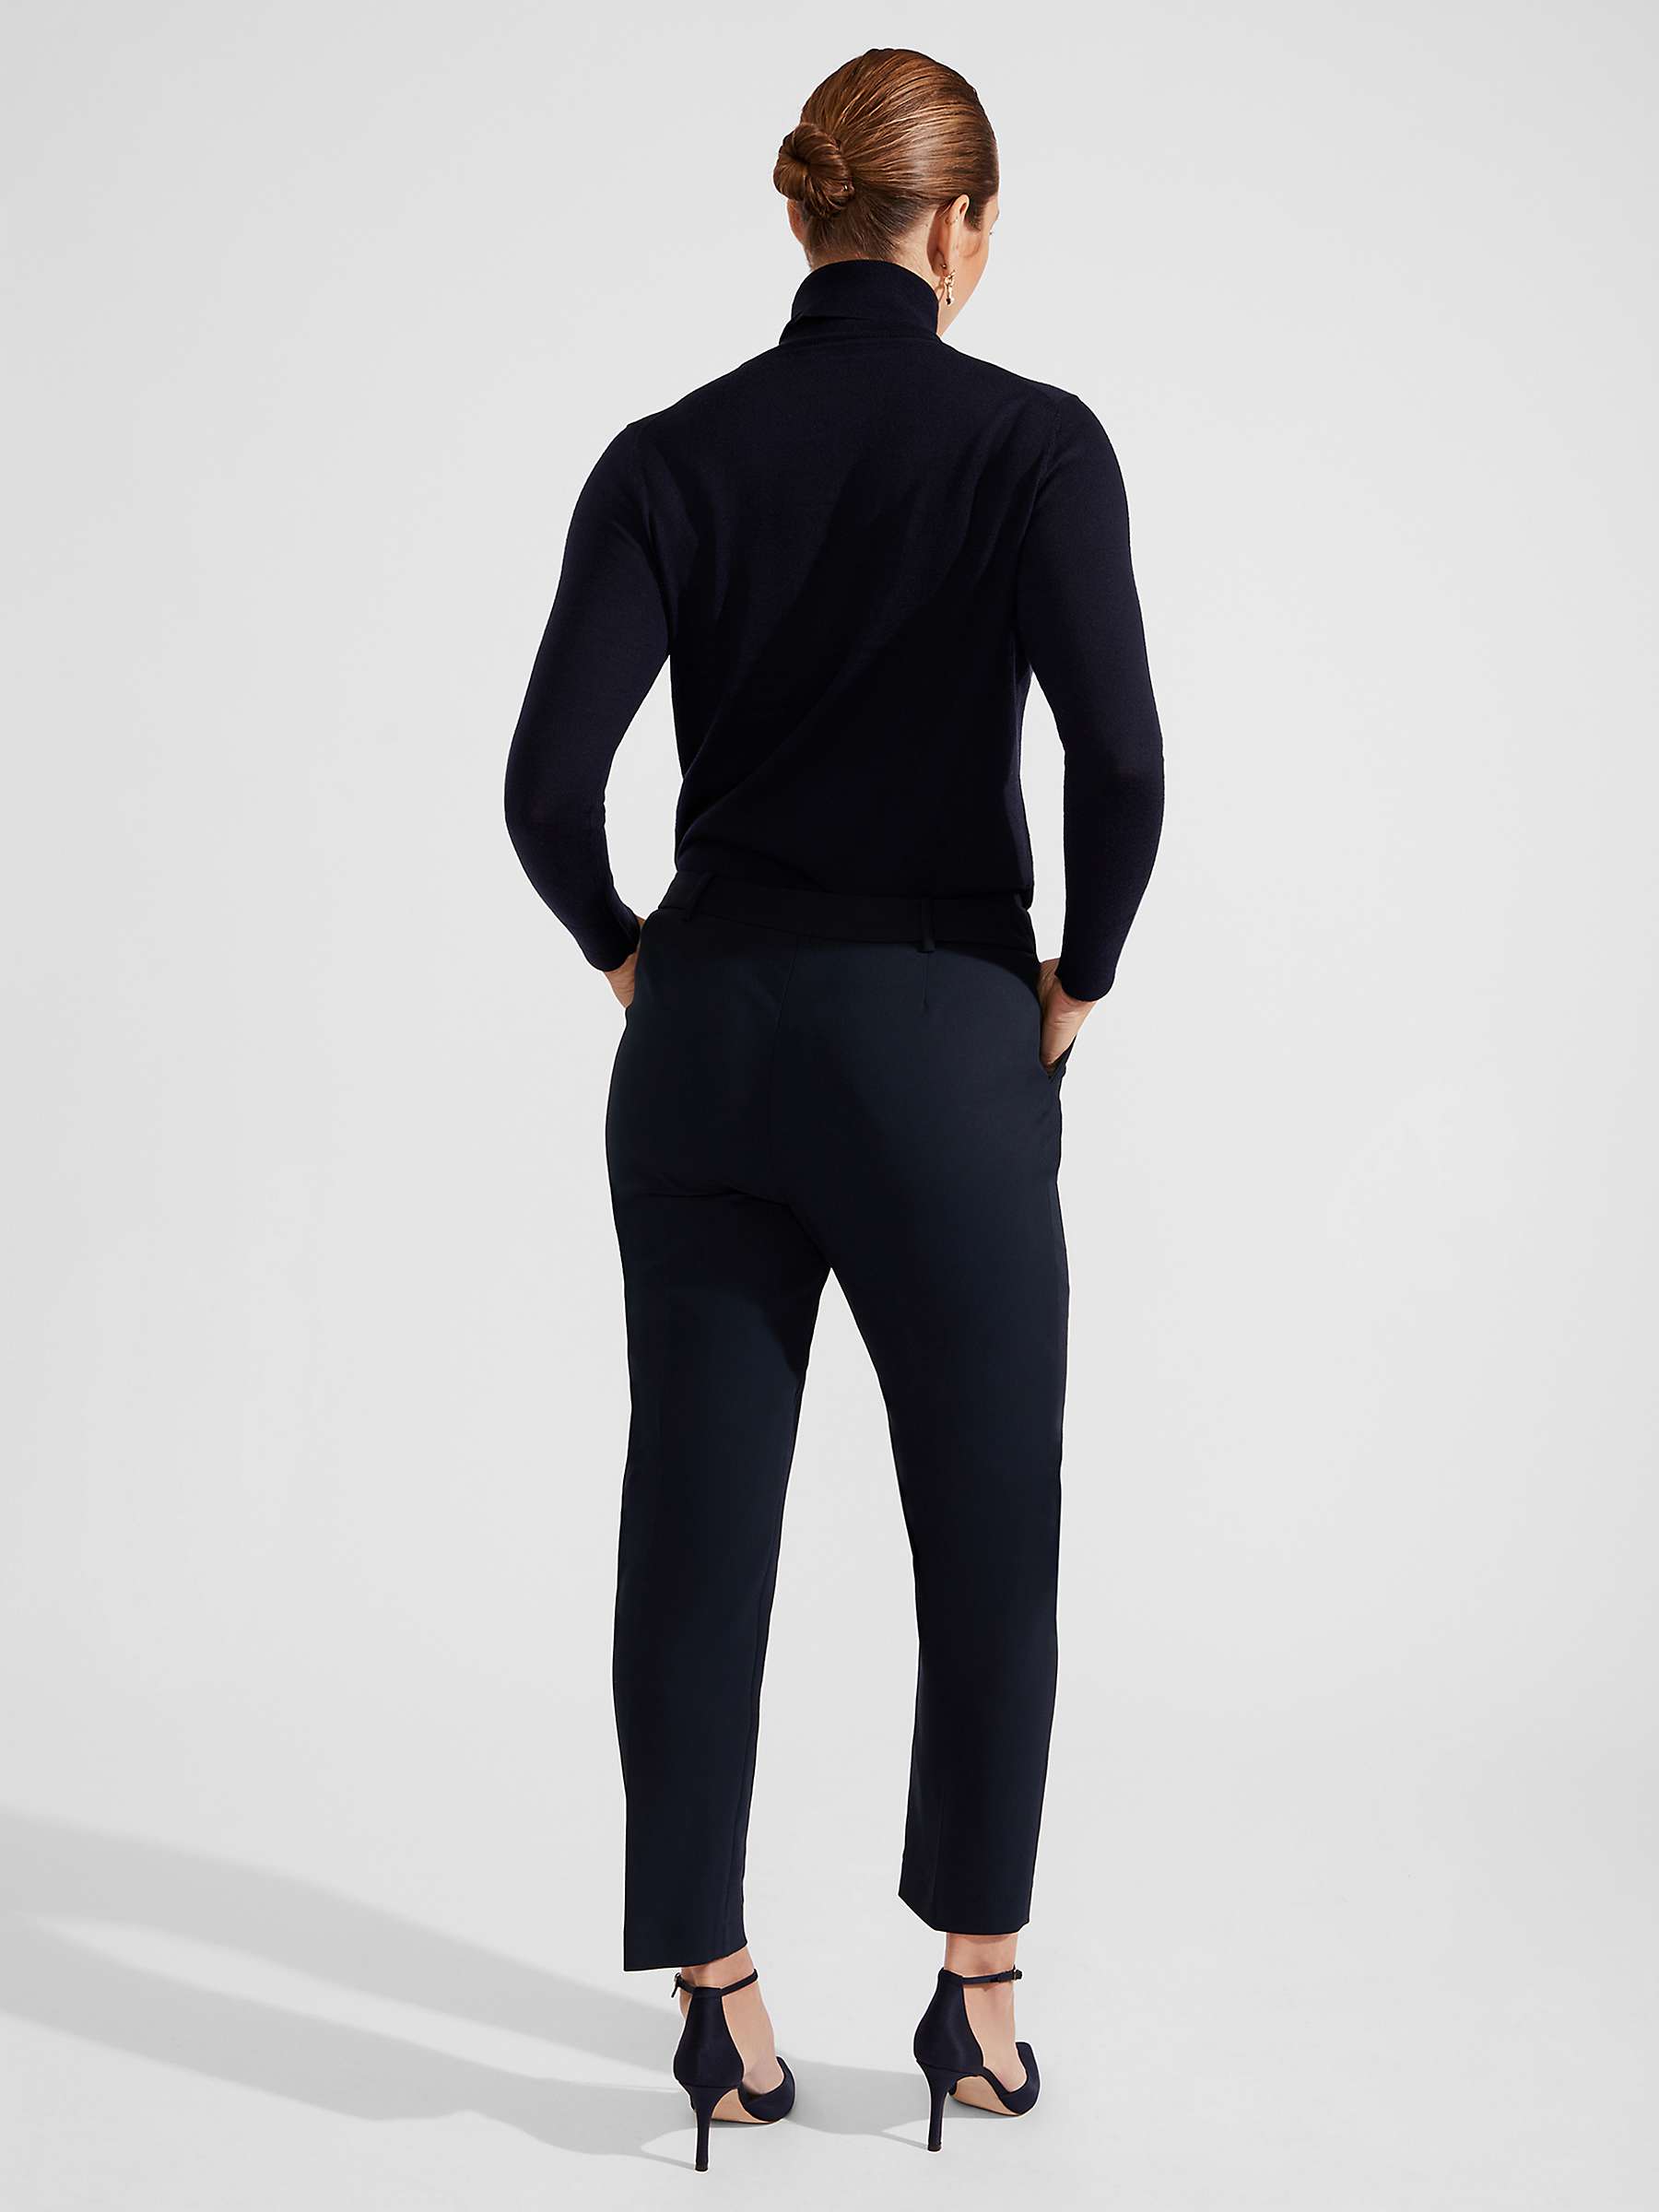 Buy Hobbs Petite Quin Cotton Blend Trousers, Navy Online at johnlewis.com